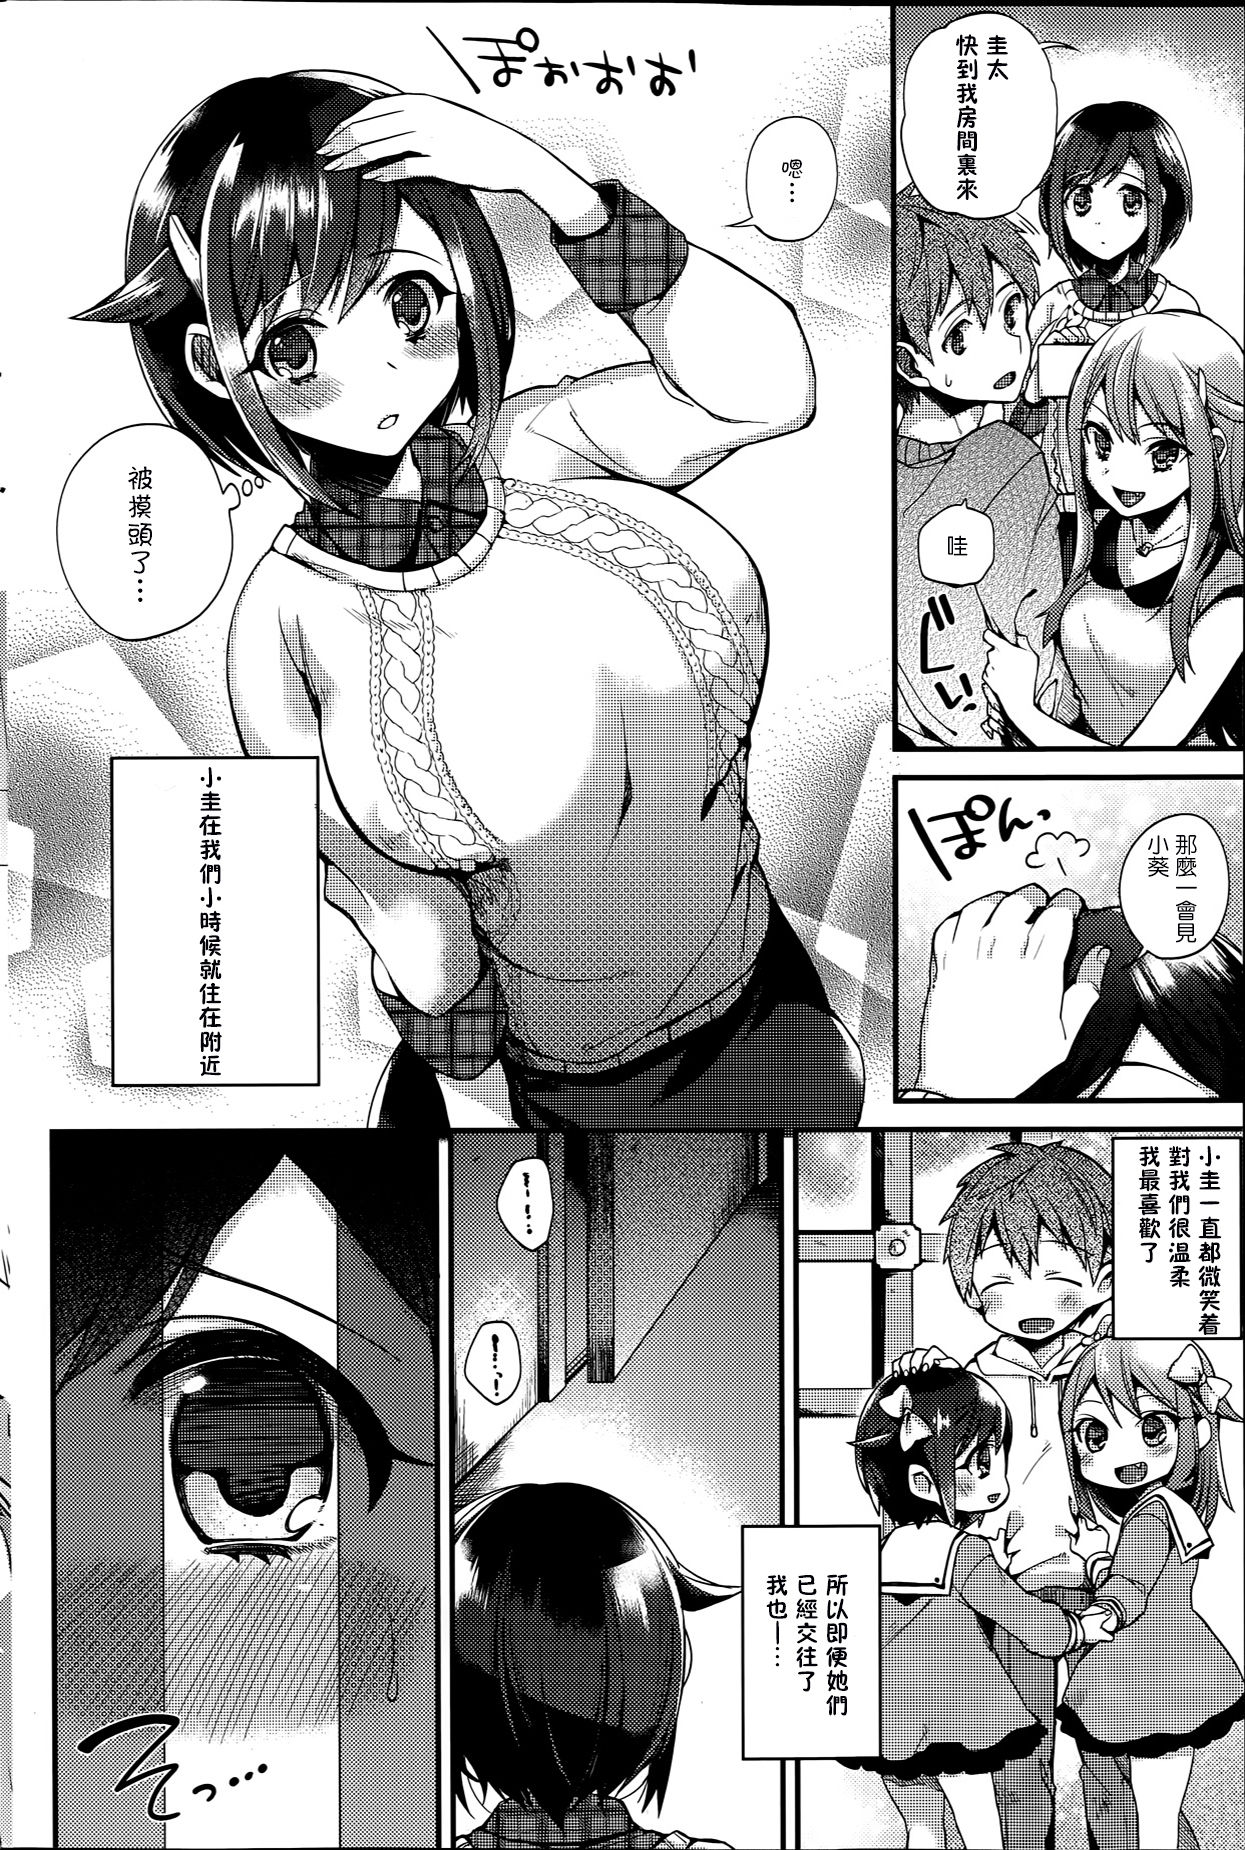 [Shindou] Sisters Conflict (Comic Hotmilk 2014-06) [Chinese] [无毒汉化组] [しんどう] Sisters Conflict (コミックホットミルク 2014年6月号) [中国翻訳]